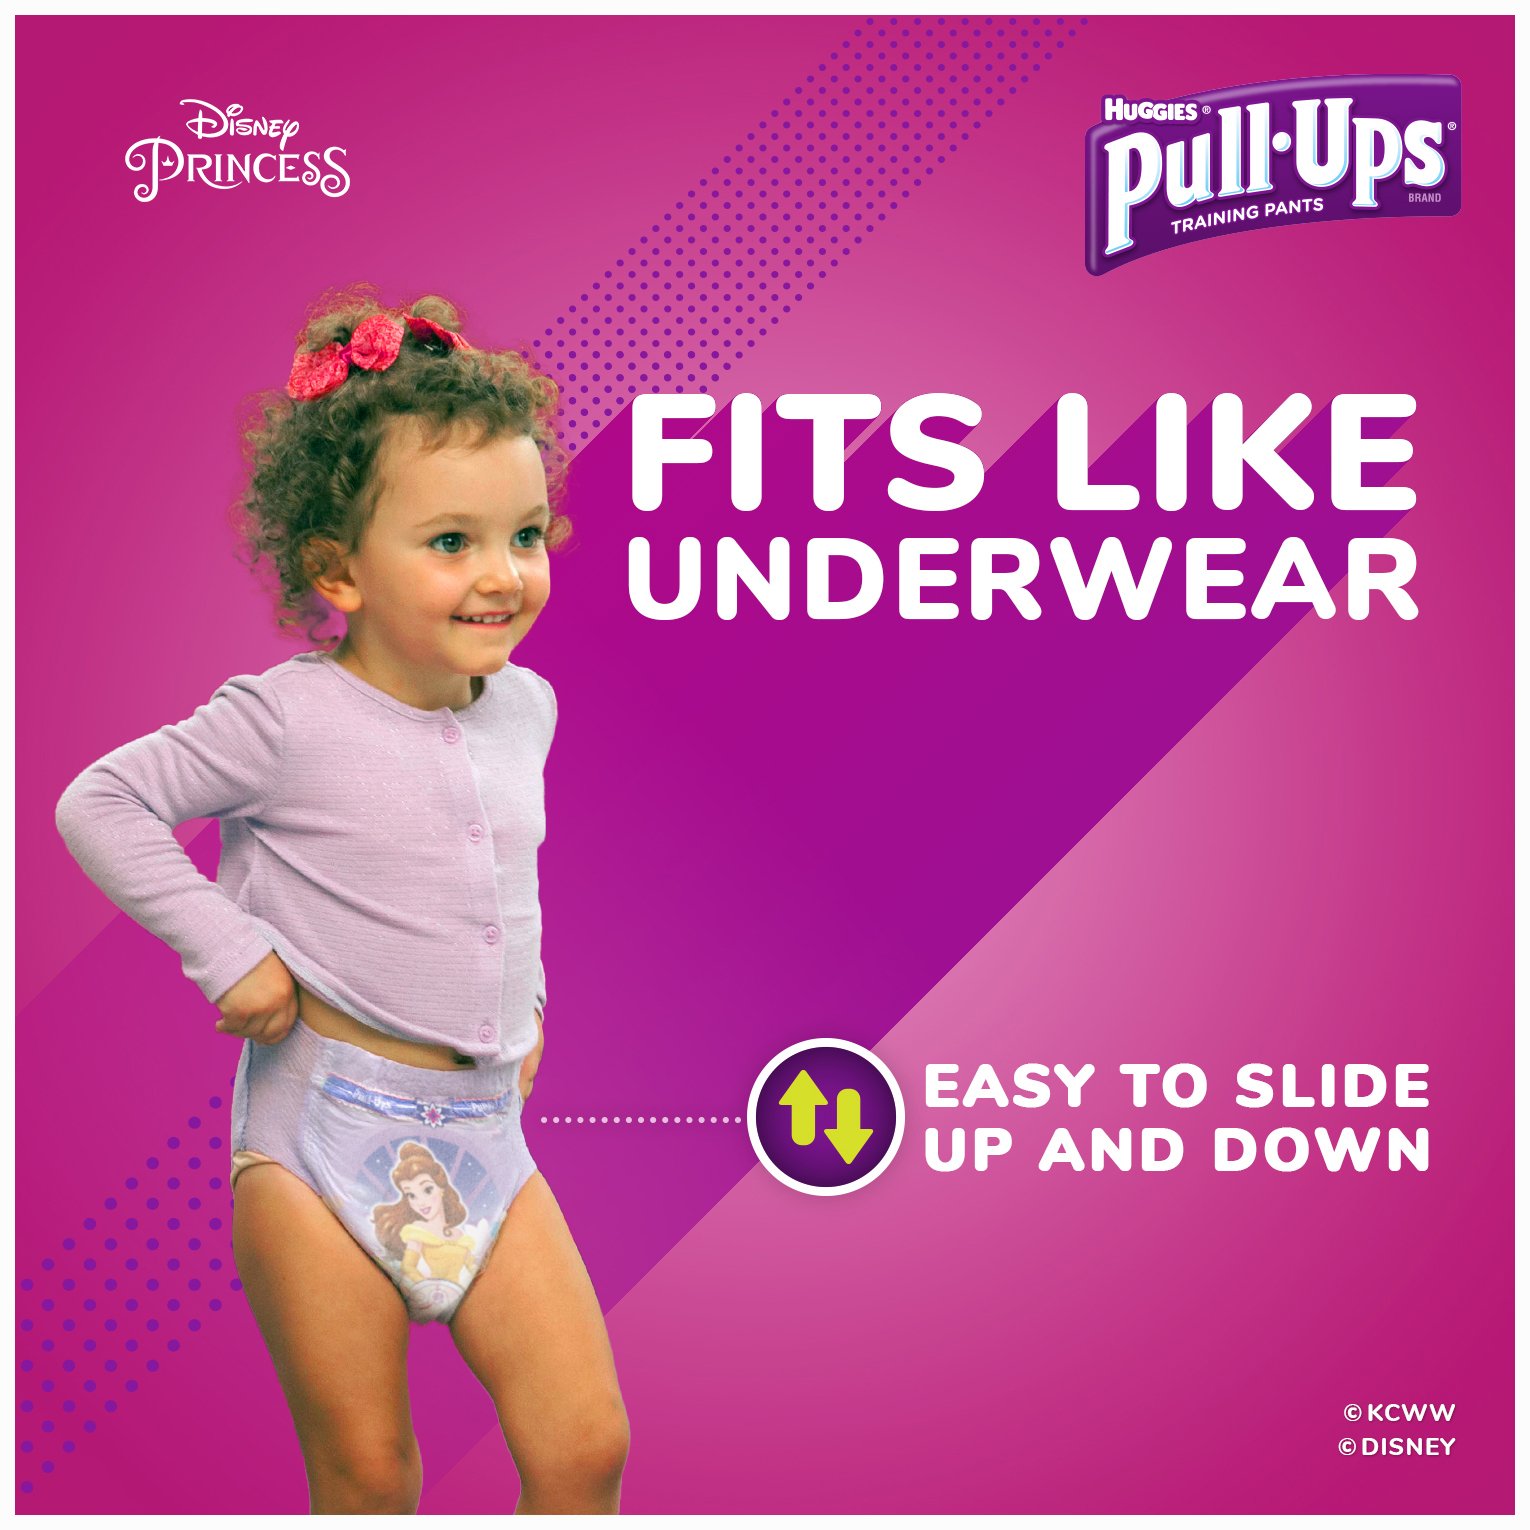 Pull-Ups Night-Time Potty Training Pants for Girls, 2T-3T (18-34 lb.), 23 Ct. (Packaging May Vary) - image 6 of 7